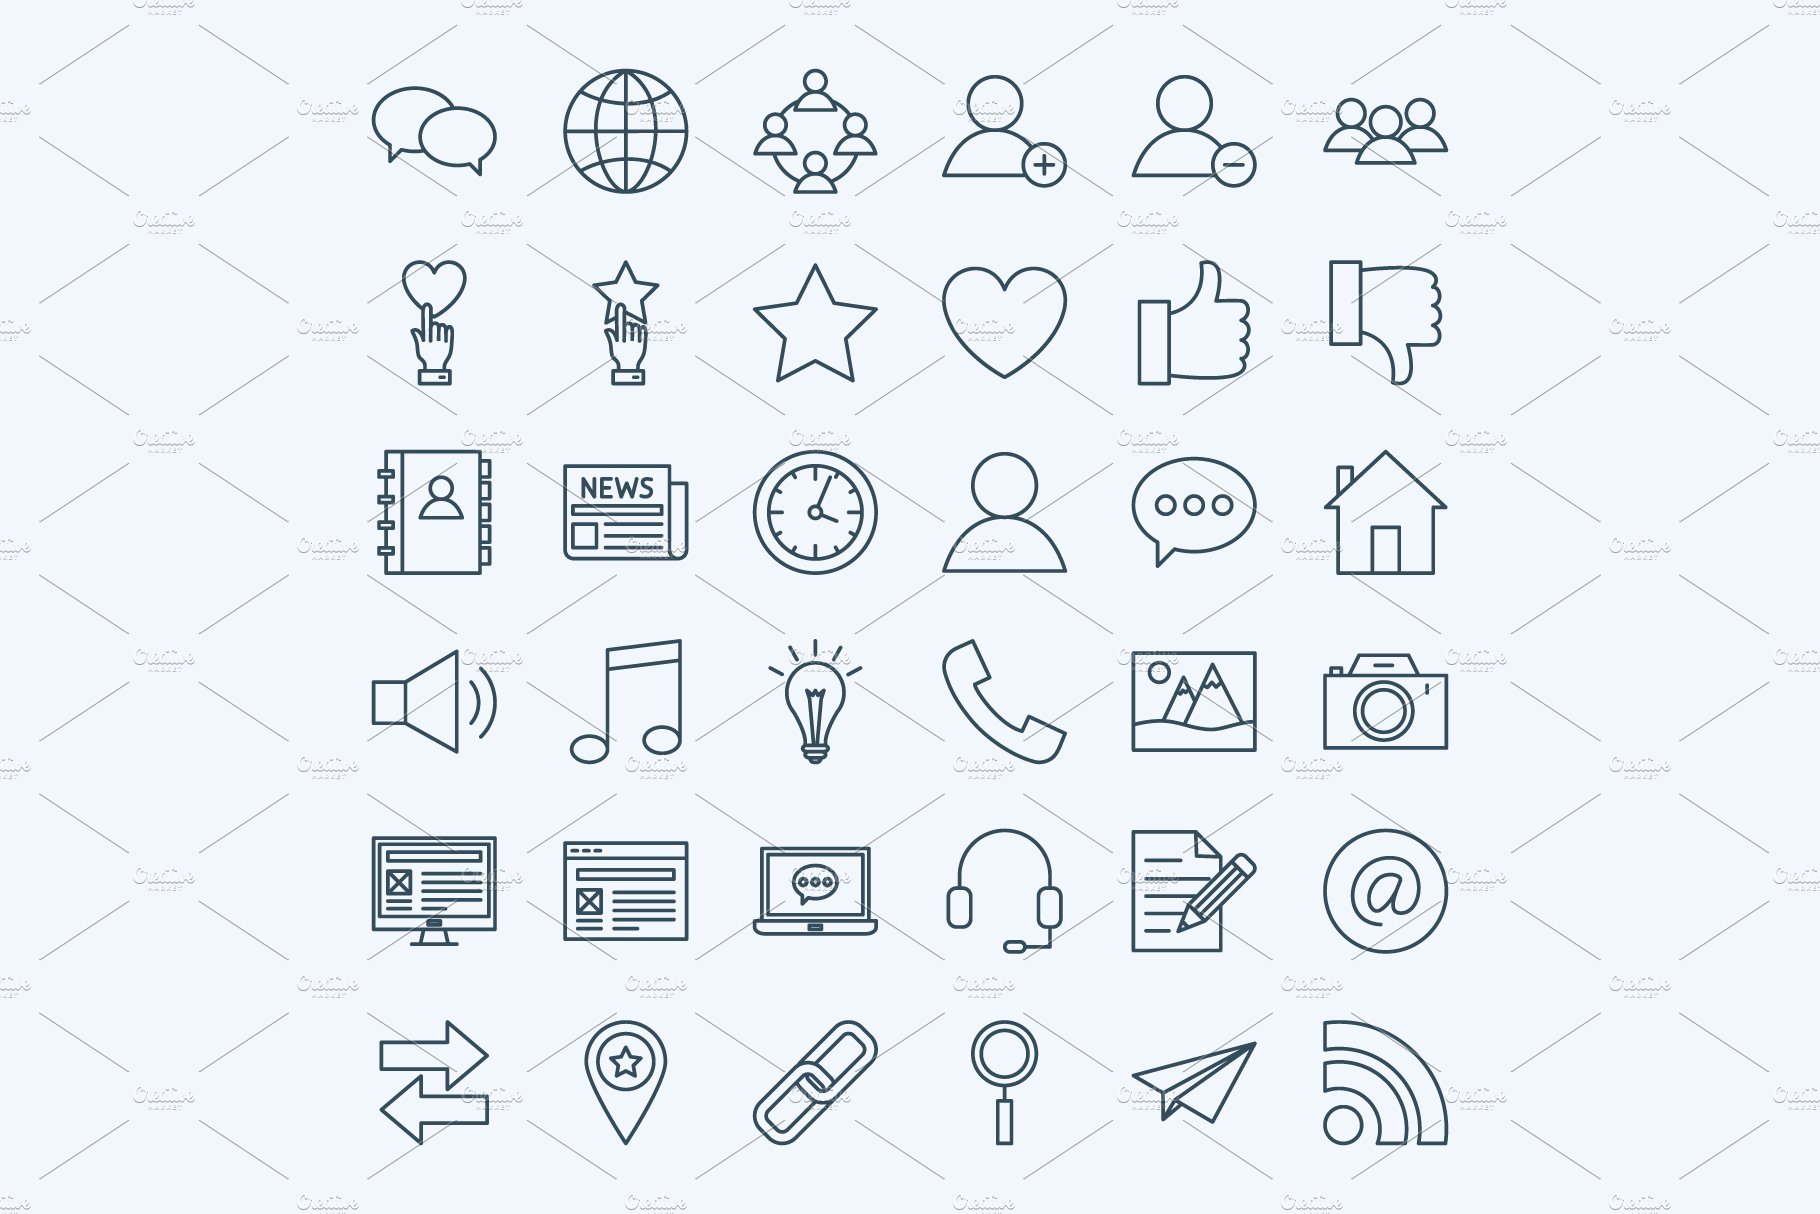 Classic icons for your presentation.